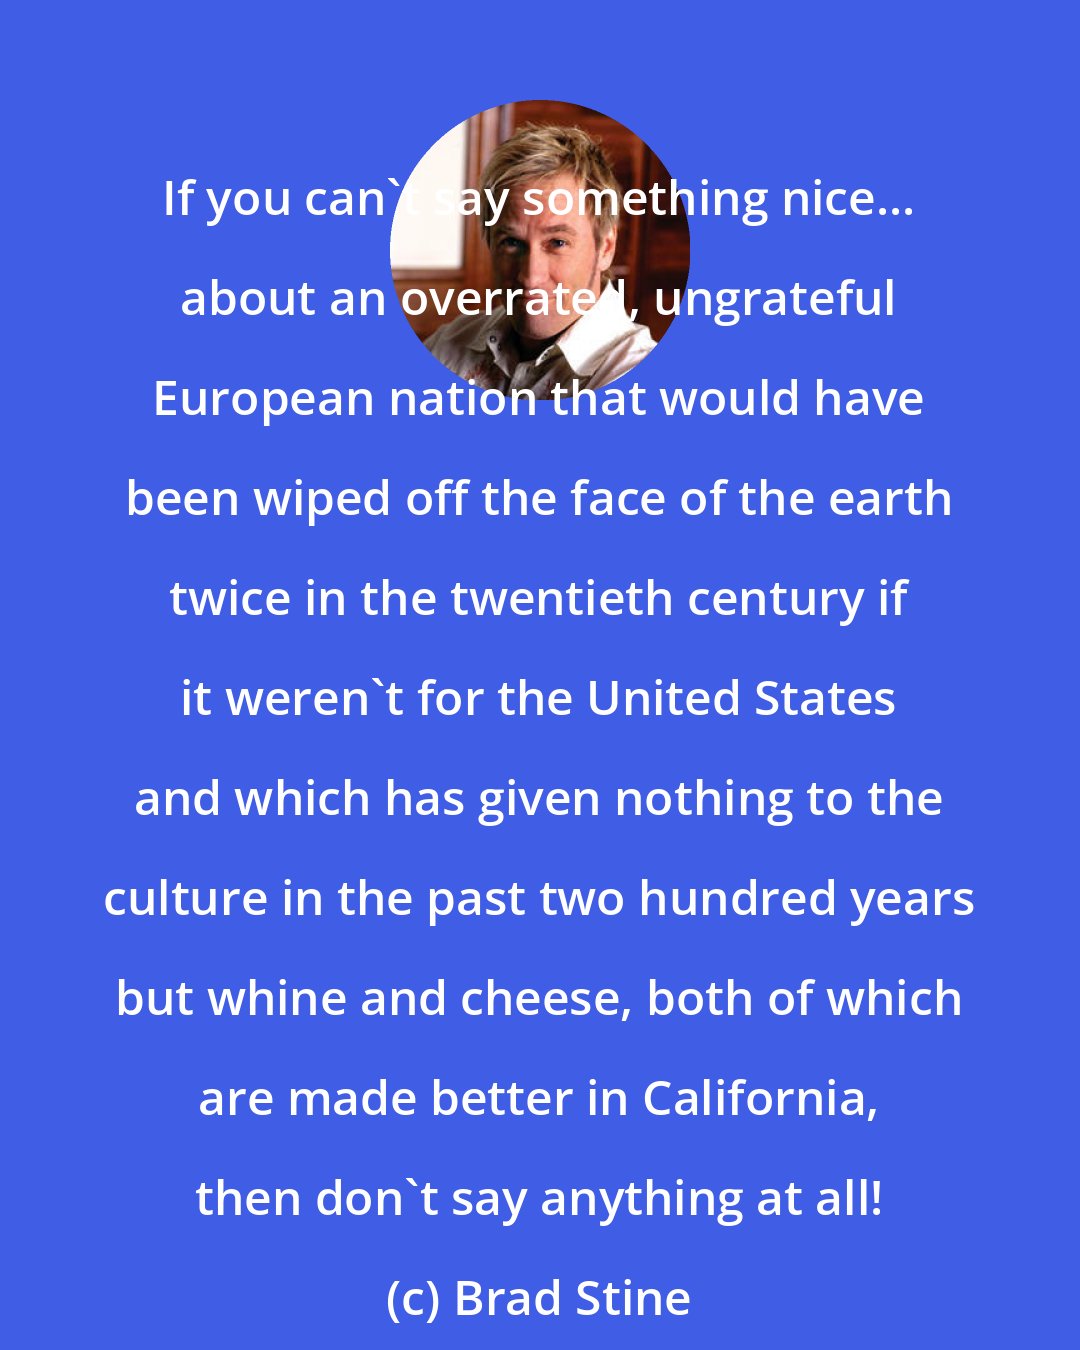 Brad Stine: If you can't say something nice... about an overrated, ungrateful European nation that would have been wiped off the face of the earth twice in the twentieth century if it weren't for the United States and which has given nothing to the culture in the past two hundred years but whine and cheese, both of which are made better in California, then don't say anything at all!